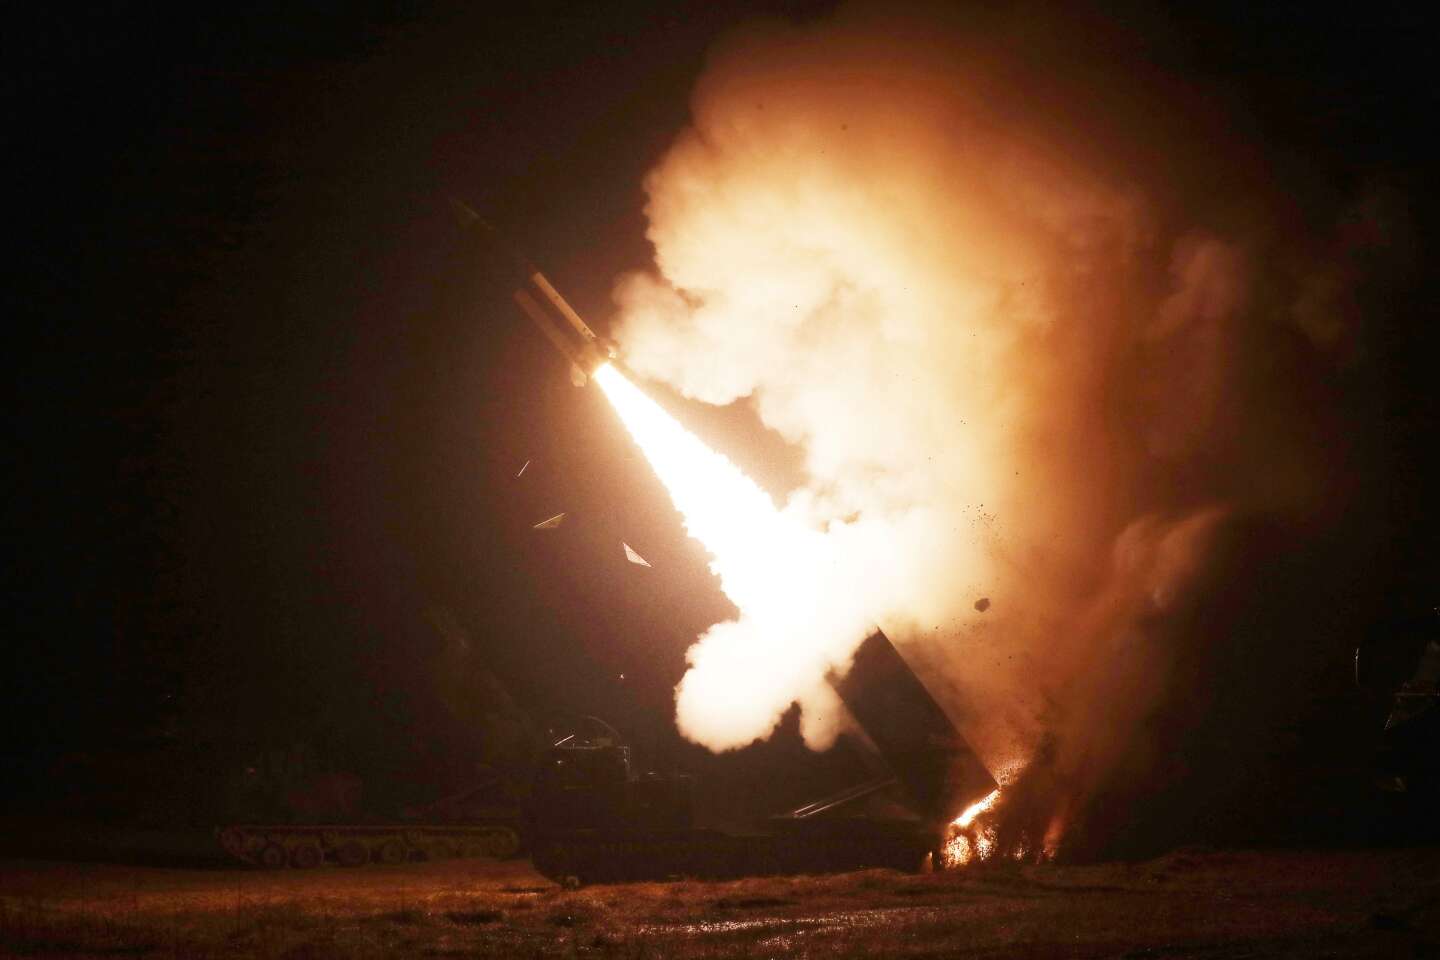 South Korea and the United States fired four missiles after North Korea fired at Japan